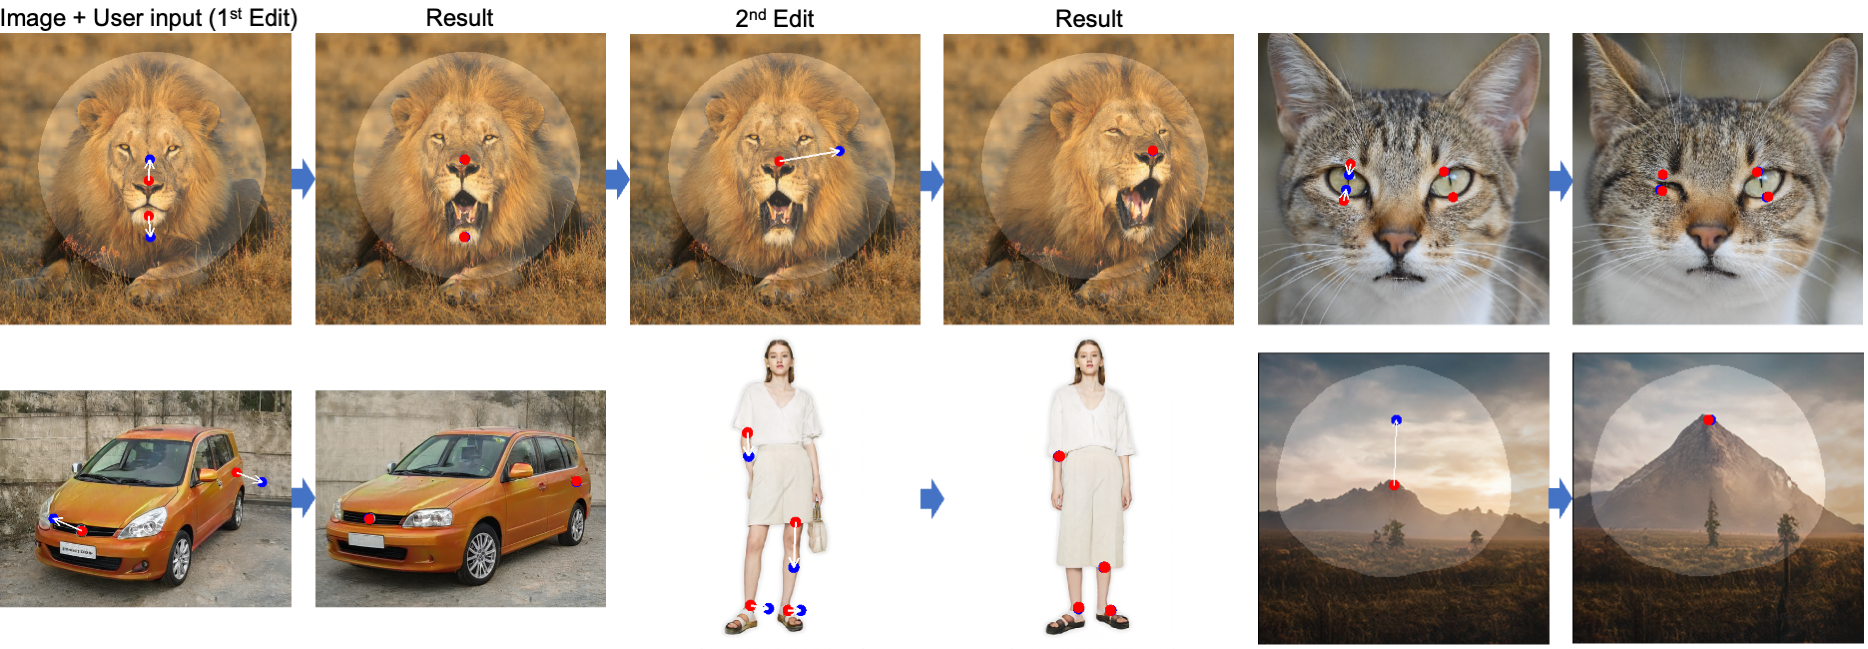 Drag Your GAN: Interactive Point-based Manipulation on the Generative Image Manifold